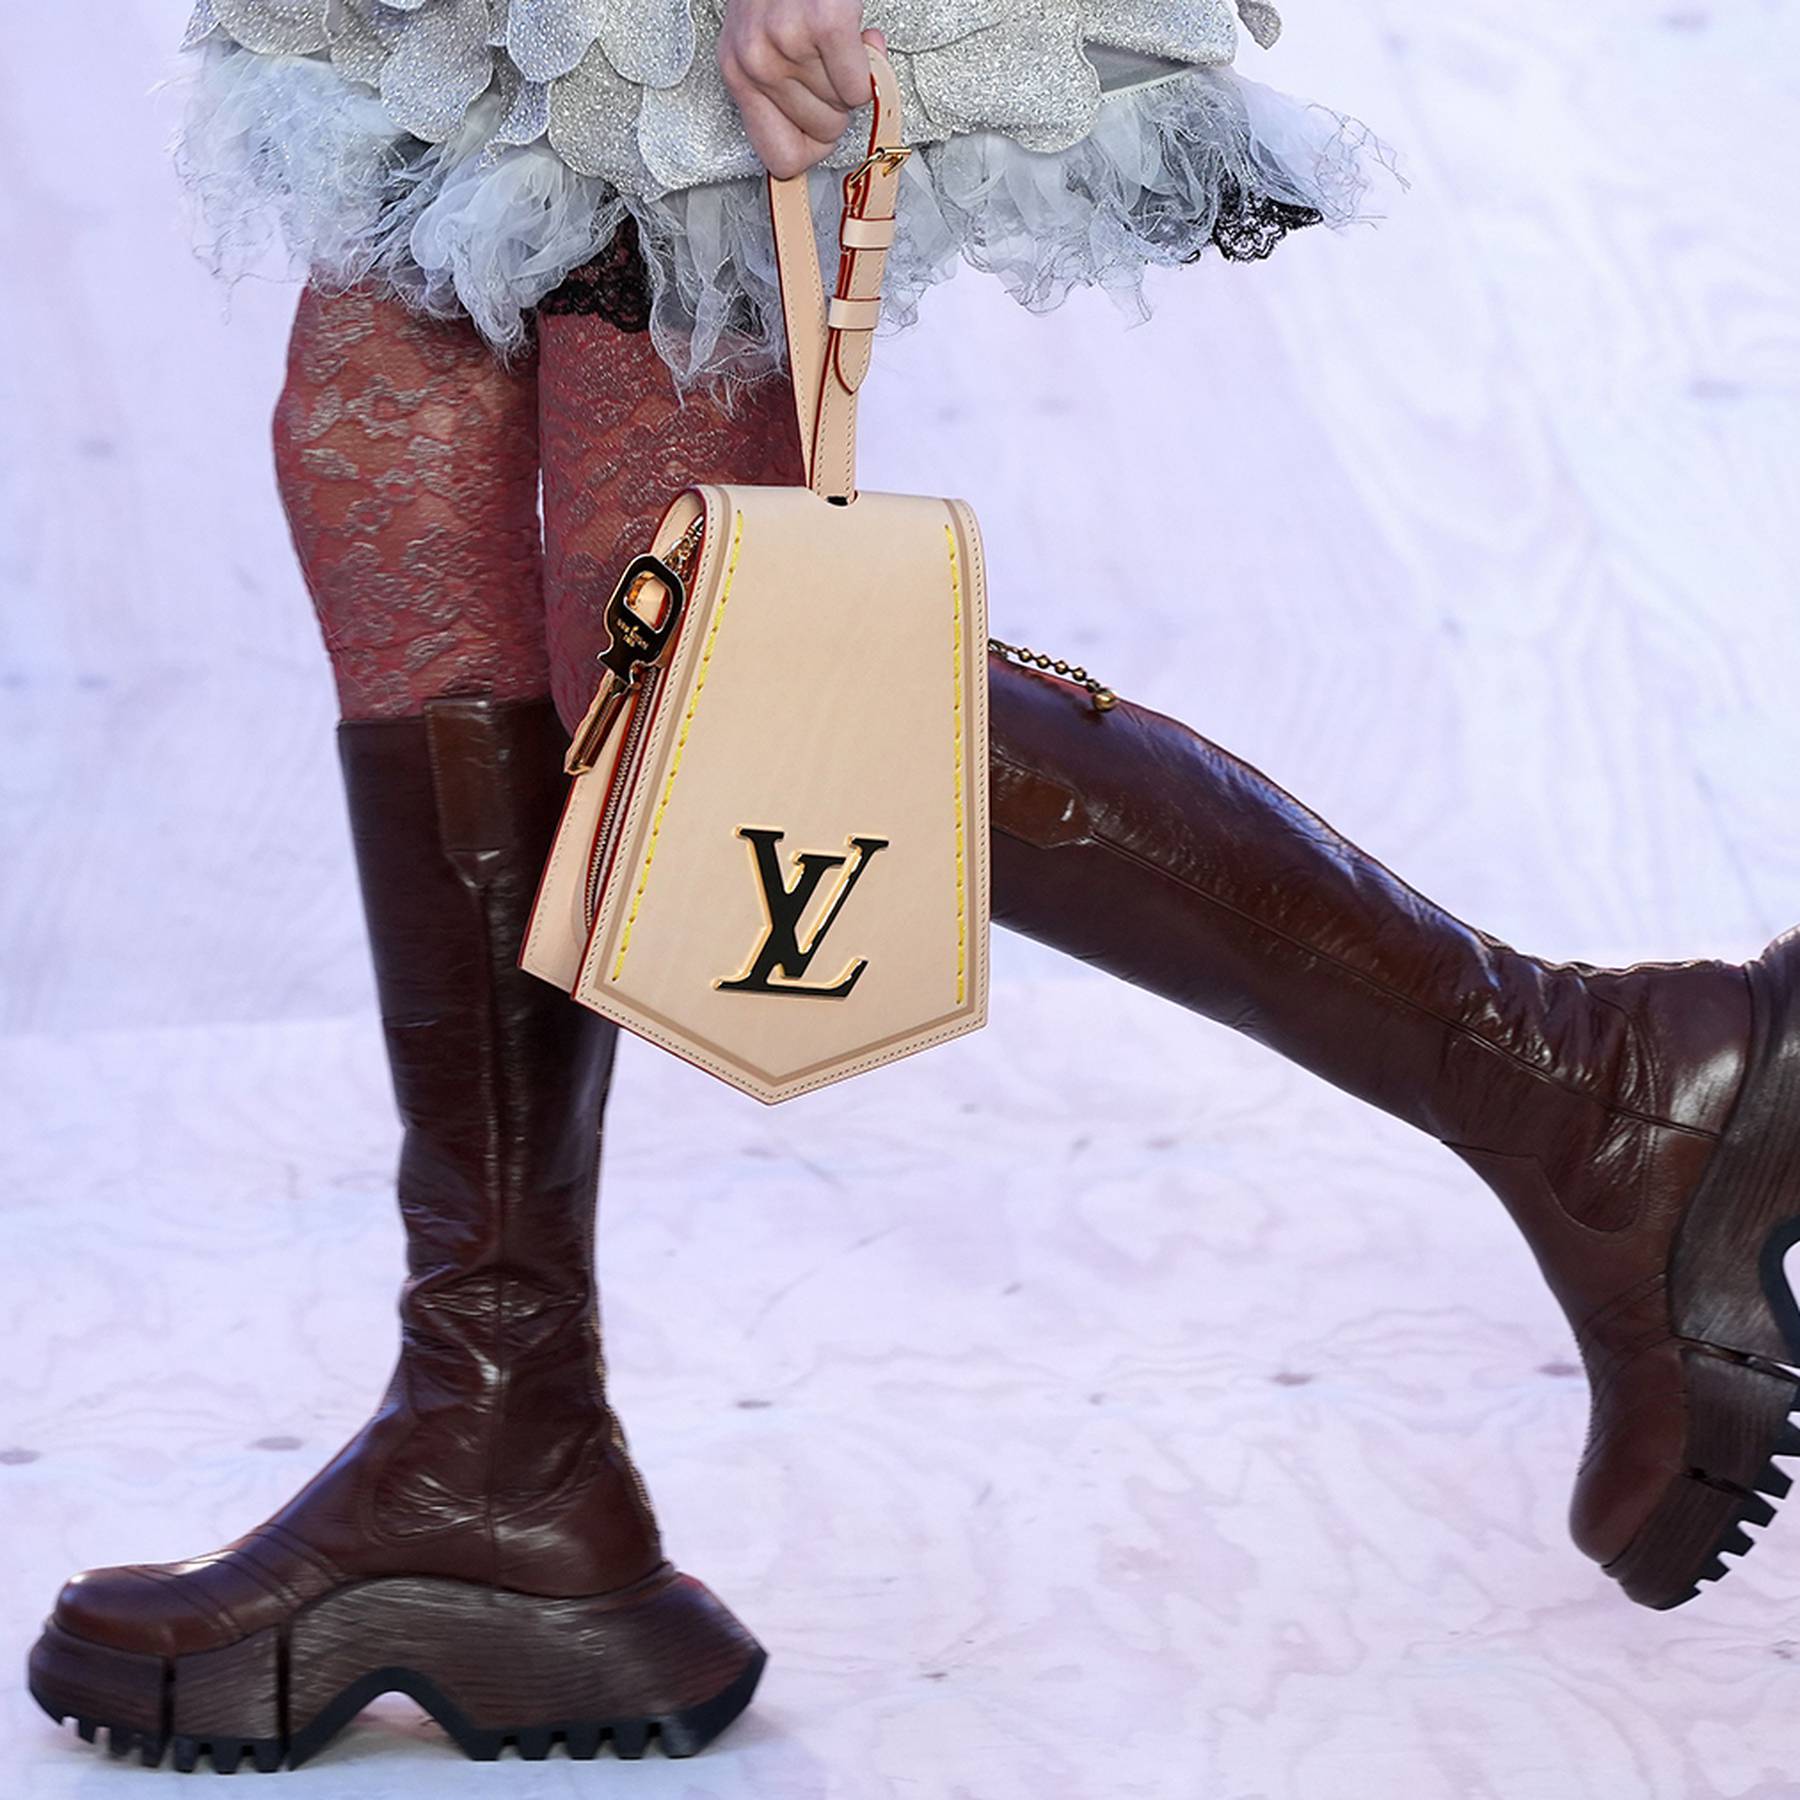 Louis Vuitton to produce bags in new Italian workshop